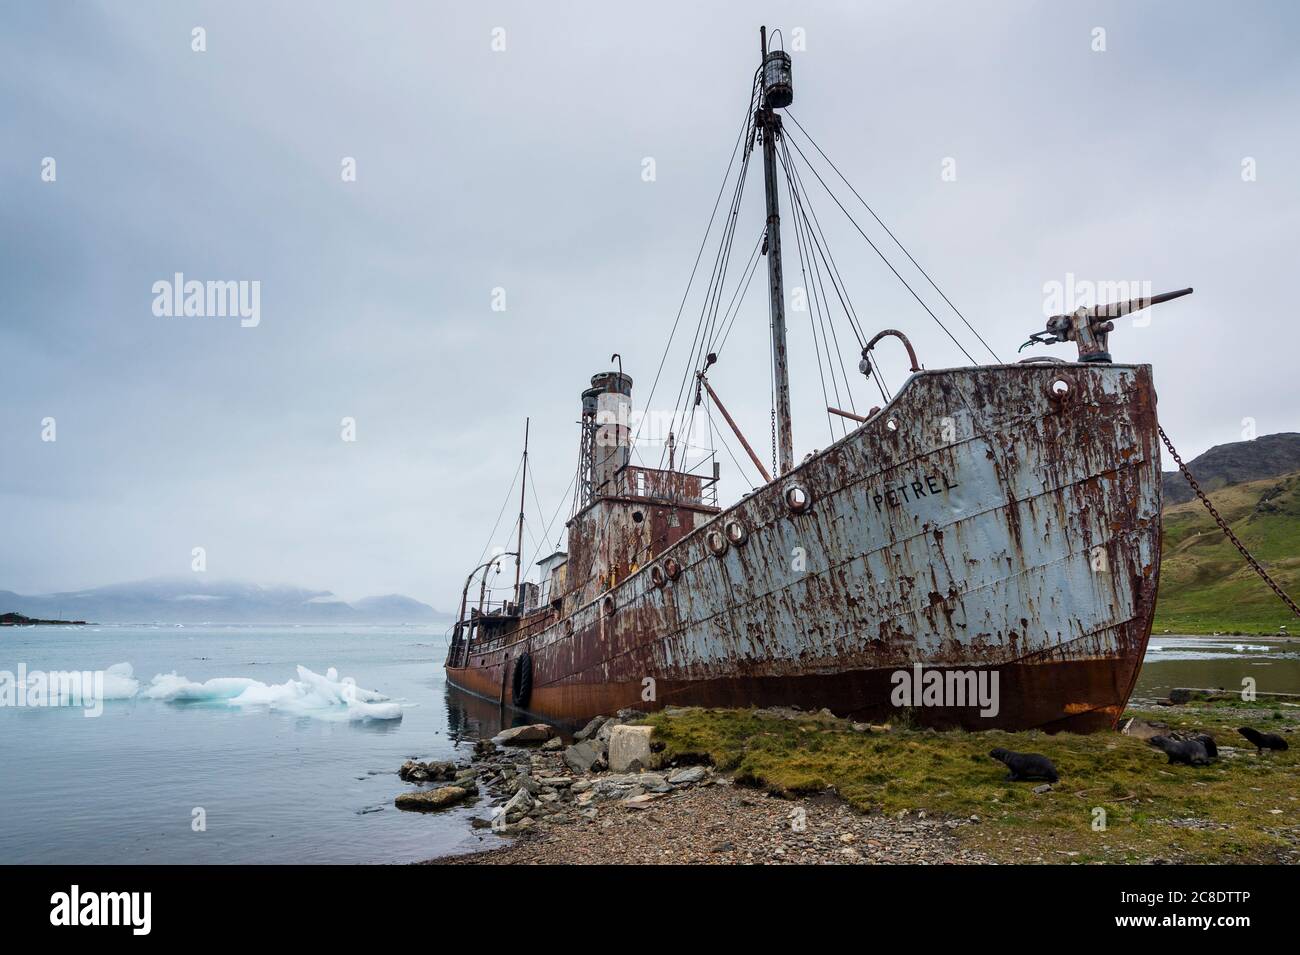 UK, South Georgia and South Sandwich Islands, Grytviken, Shipwreck of old whaling boat Stock Photo